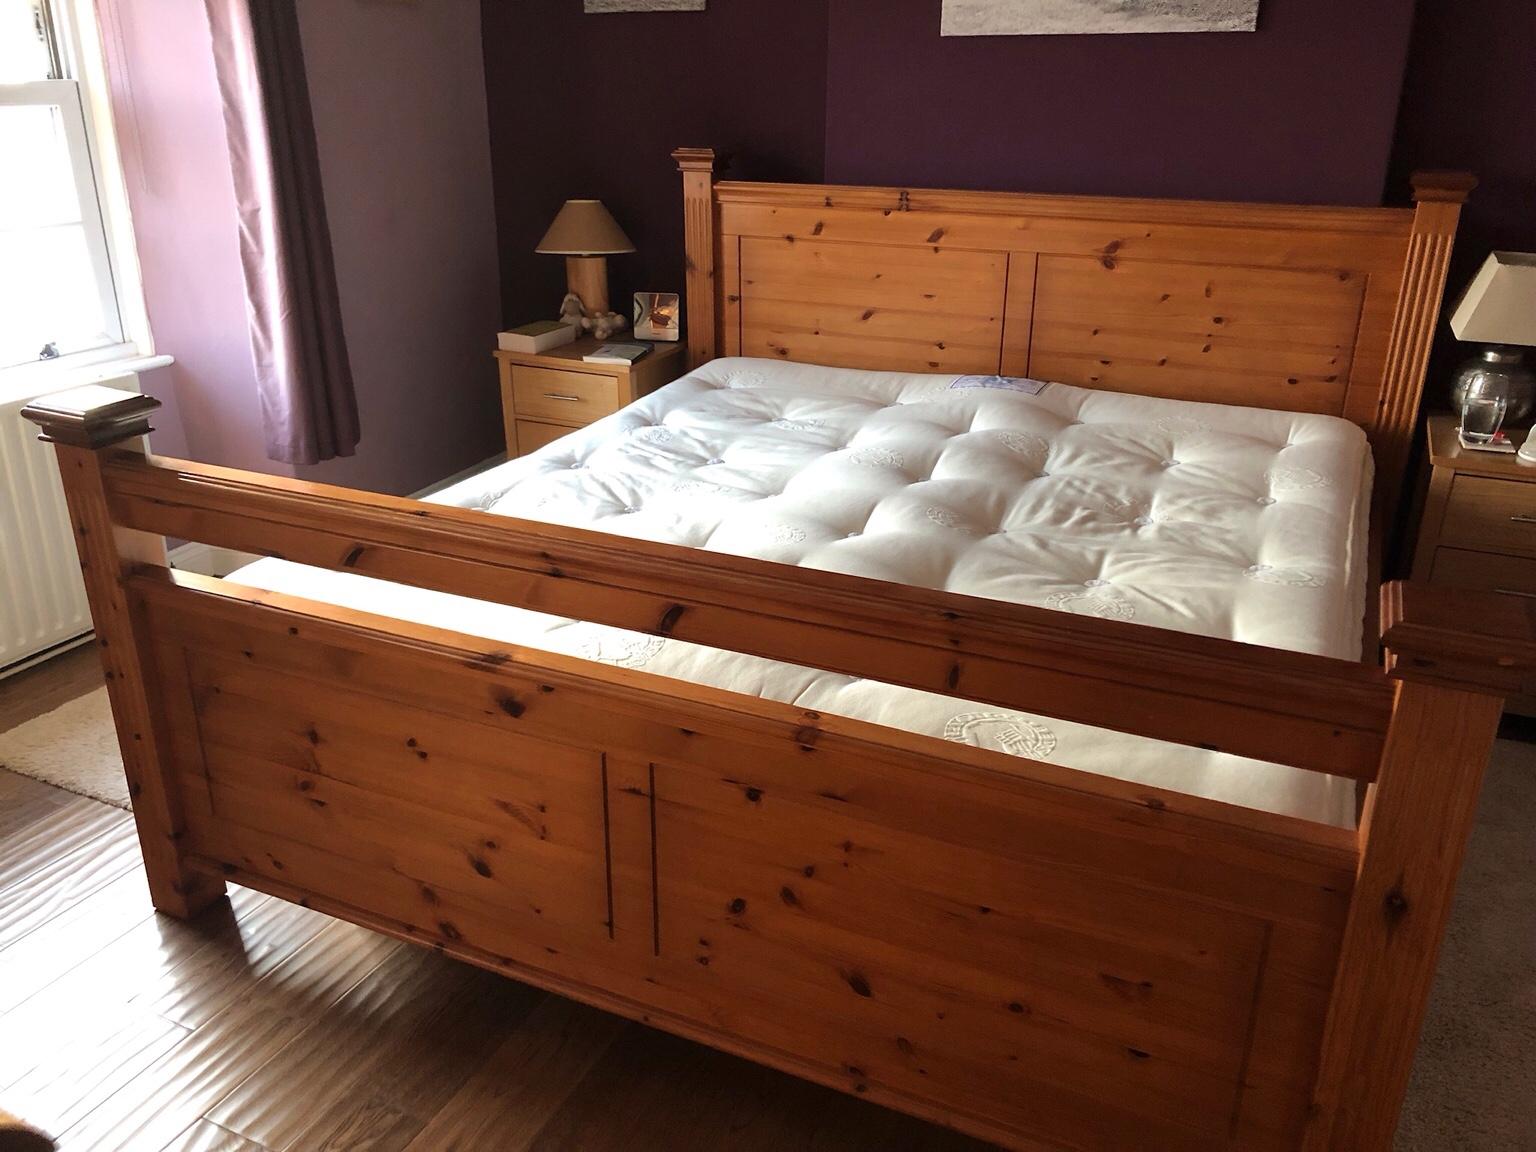 Super king size bed frame in NN14 Northamptonshire for £280.00 for sale Shpock